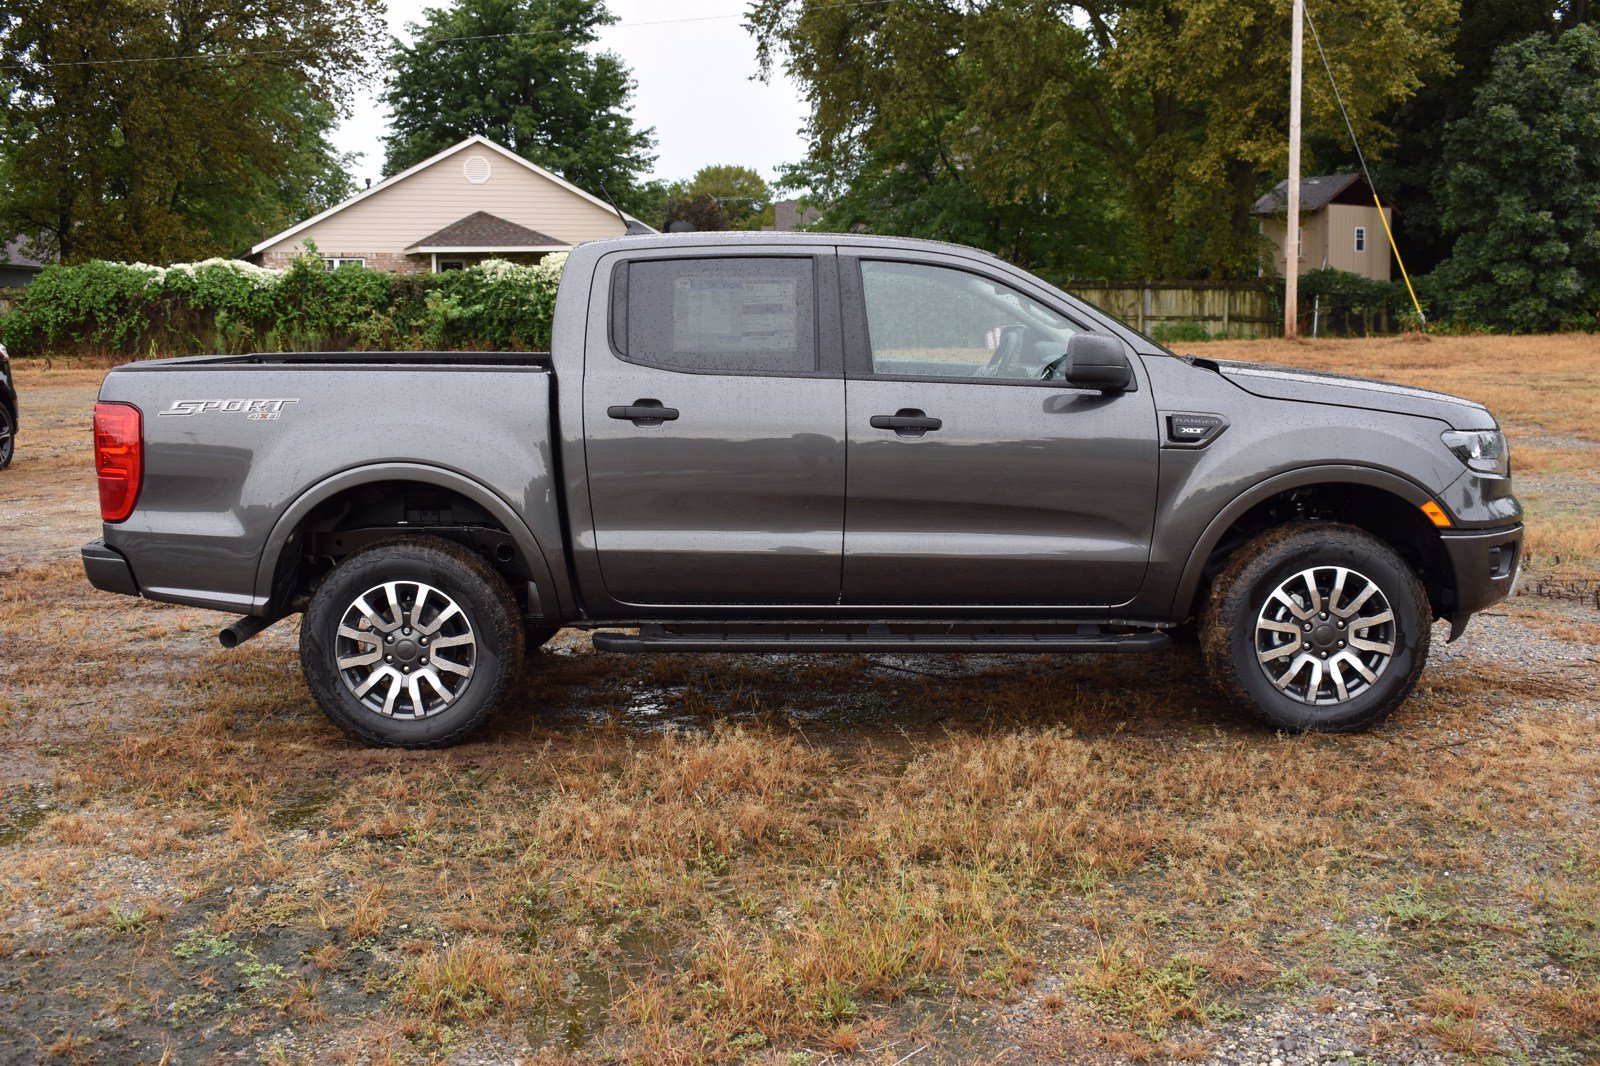 New 2020 Ford Ranger XLT 4WD Crew Cab Crew Cab Pickup in Fayetteville #